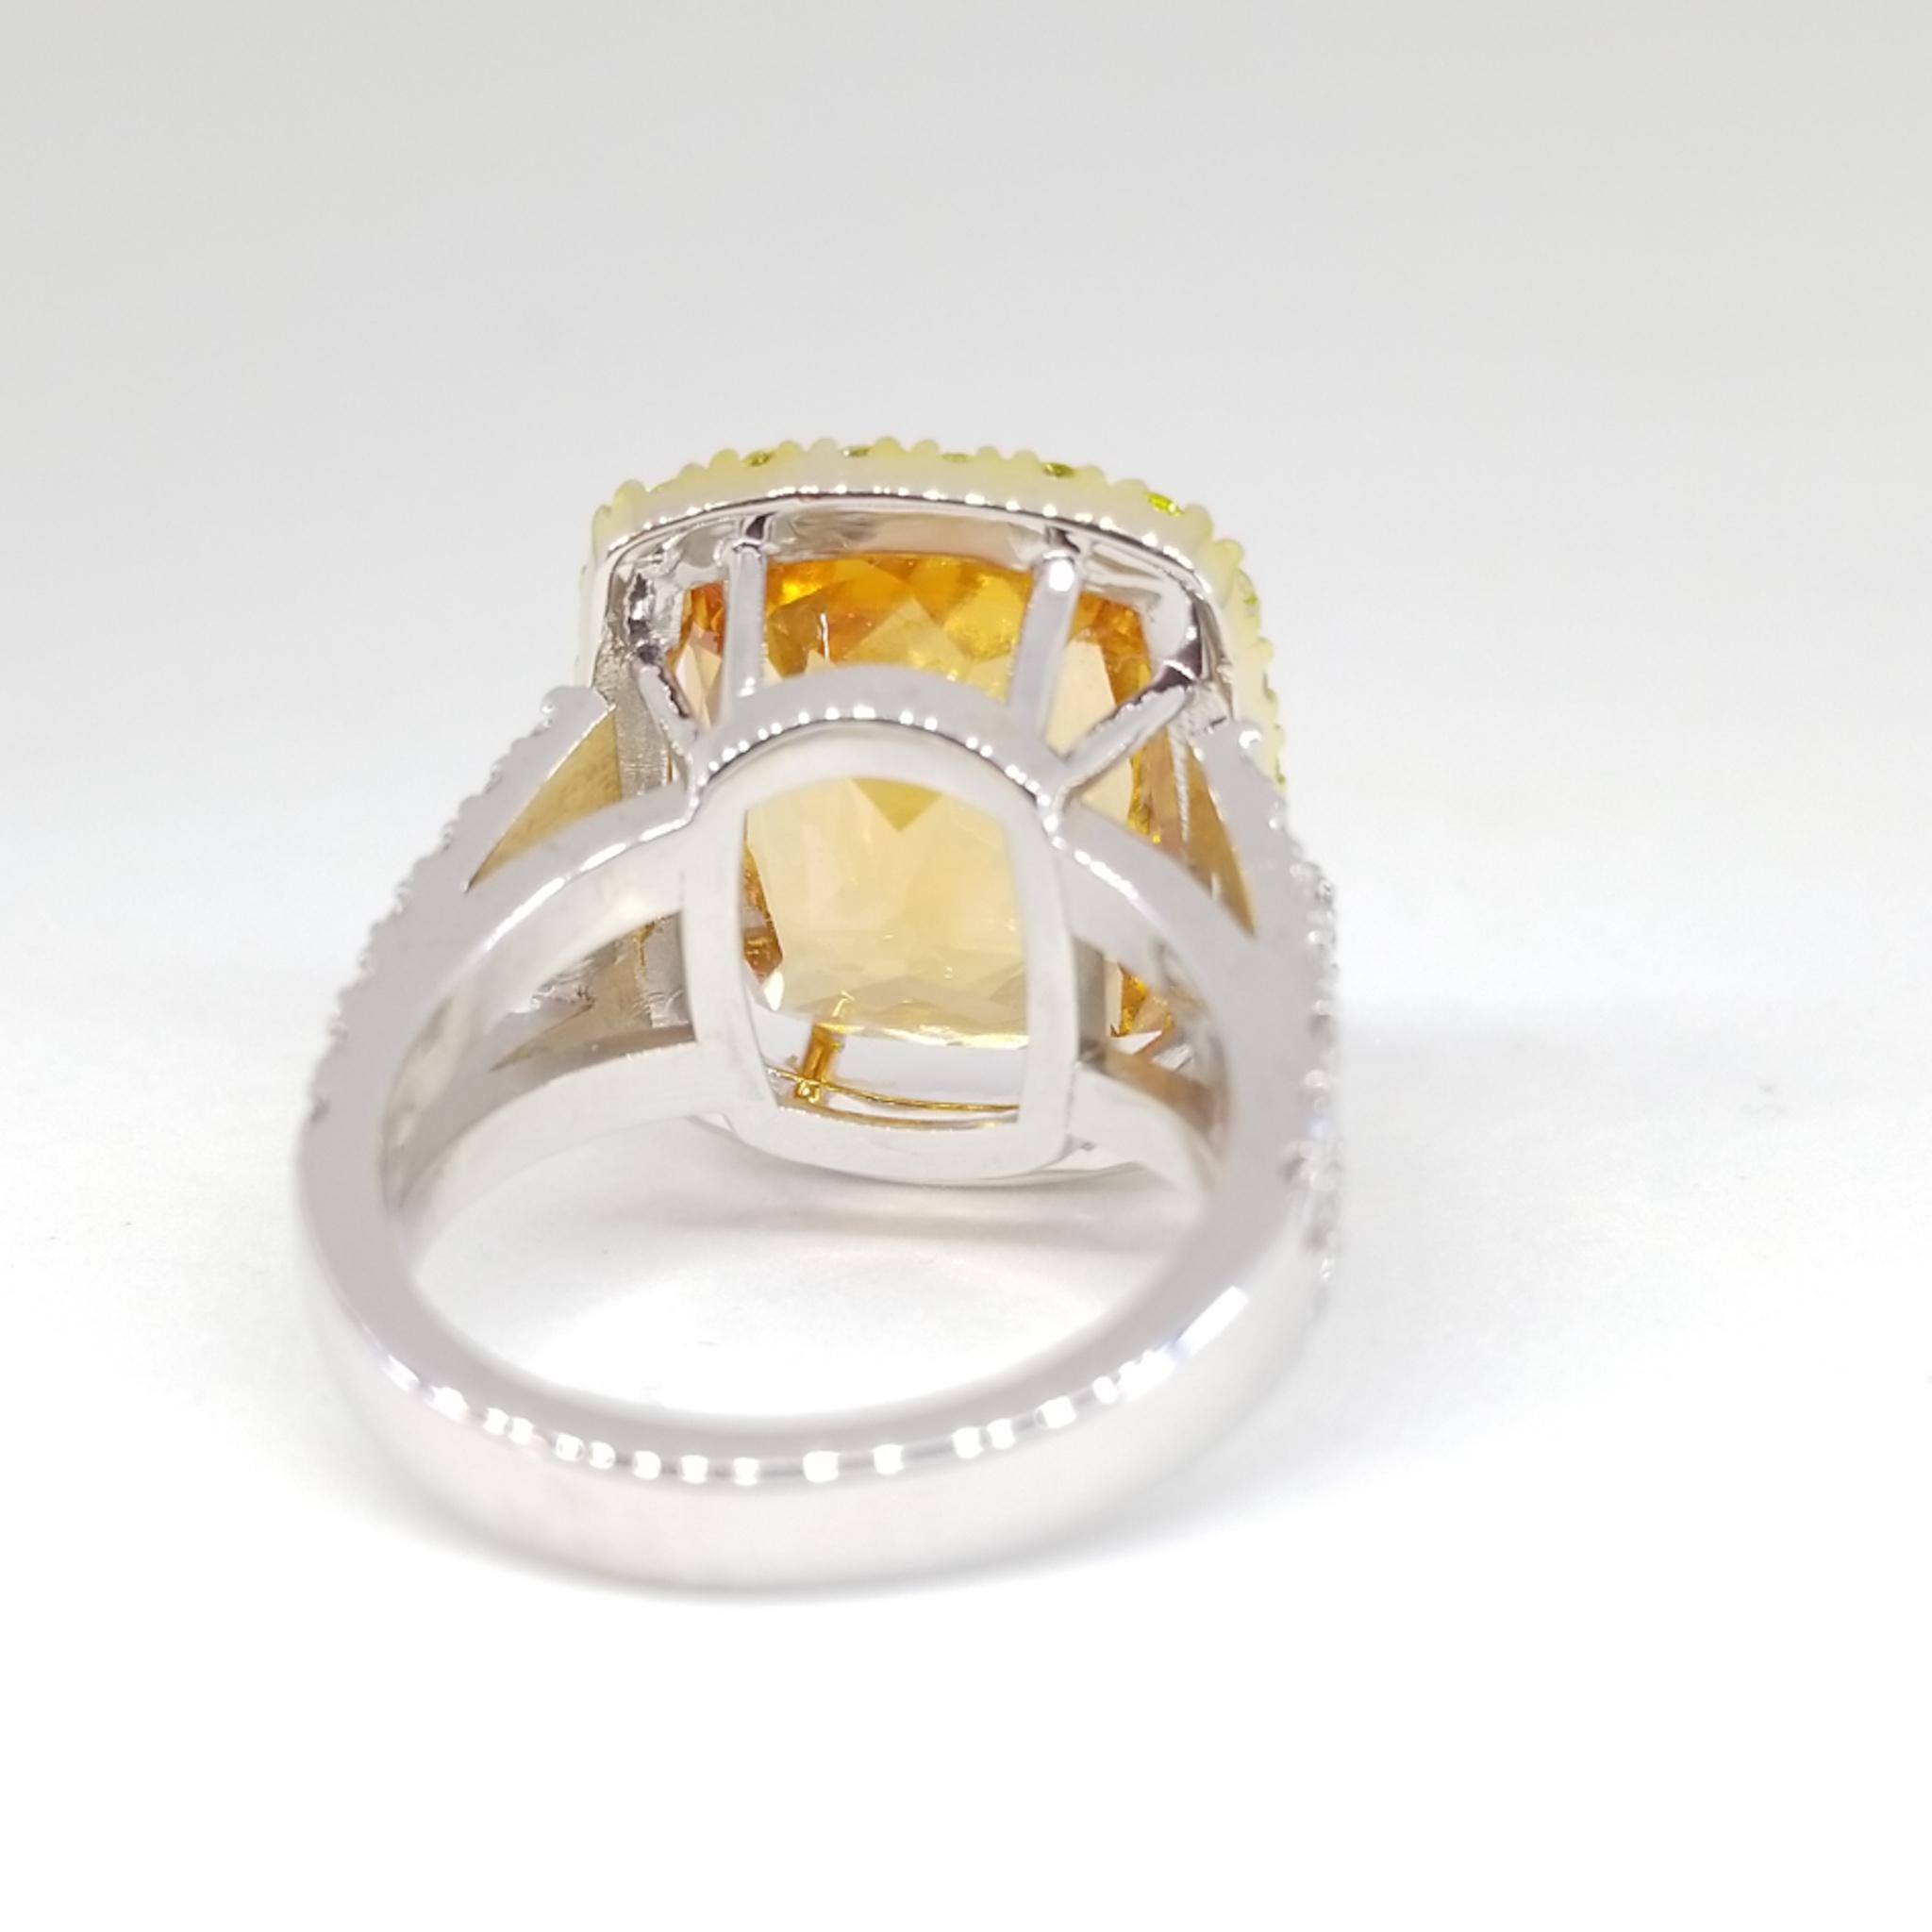 13.46 Carat Natural Grossular Garnet 1.75 Carat Canary and White Diamond Ring For Sale 1